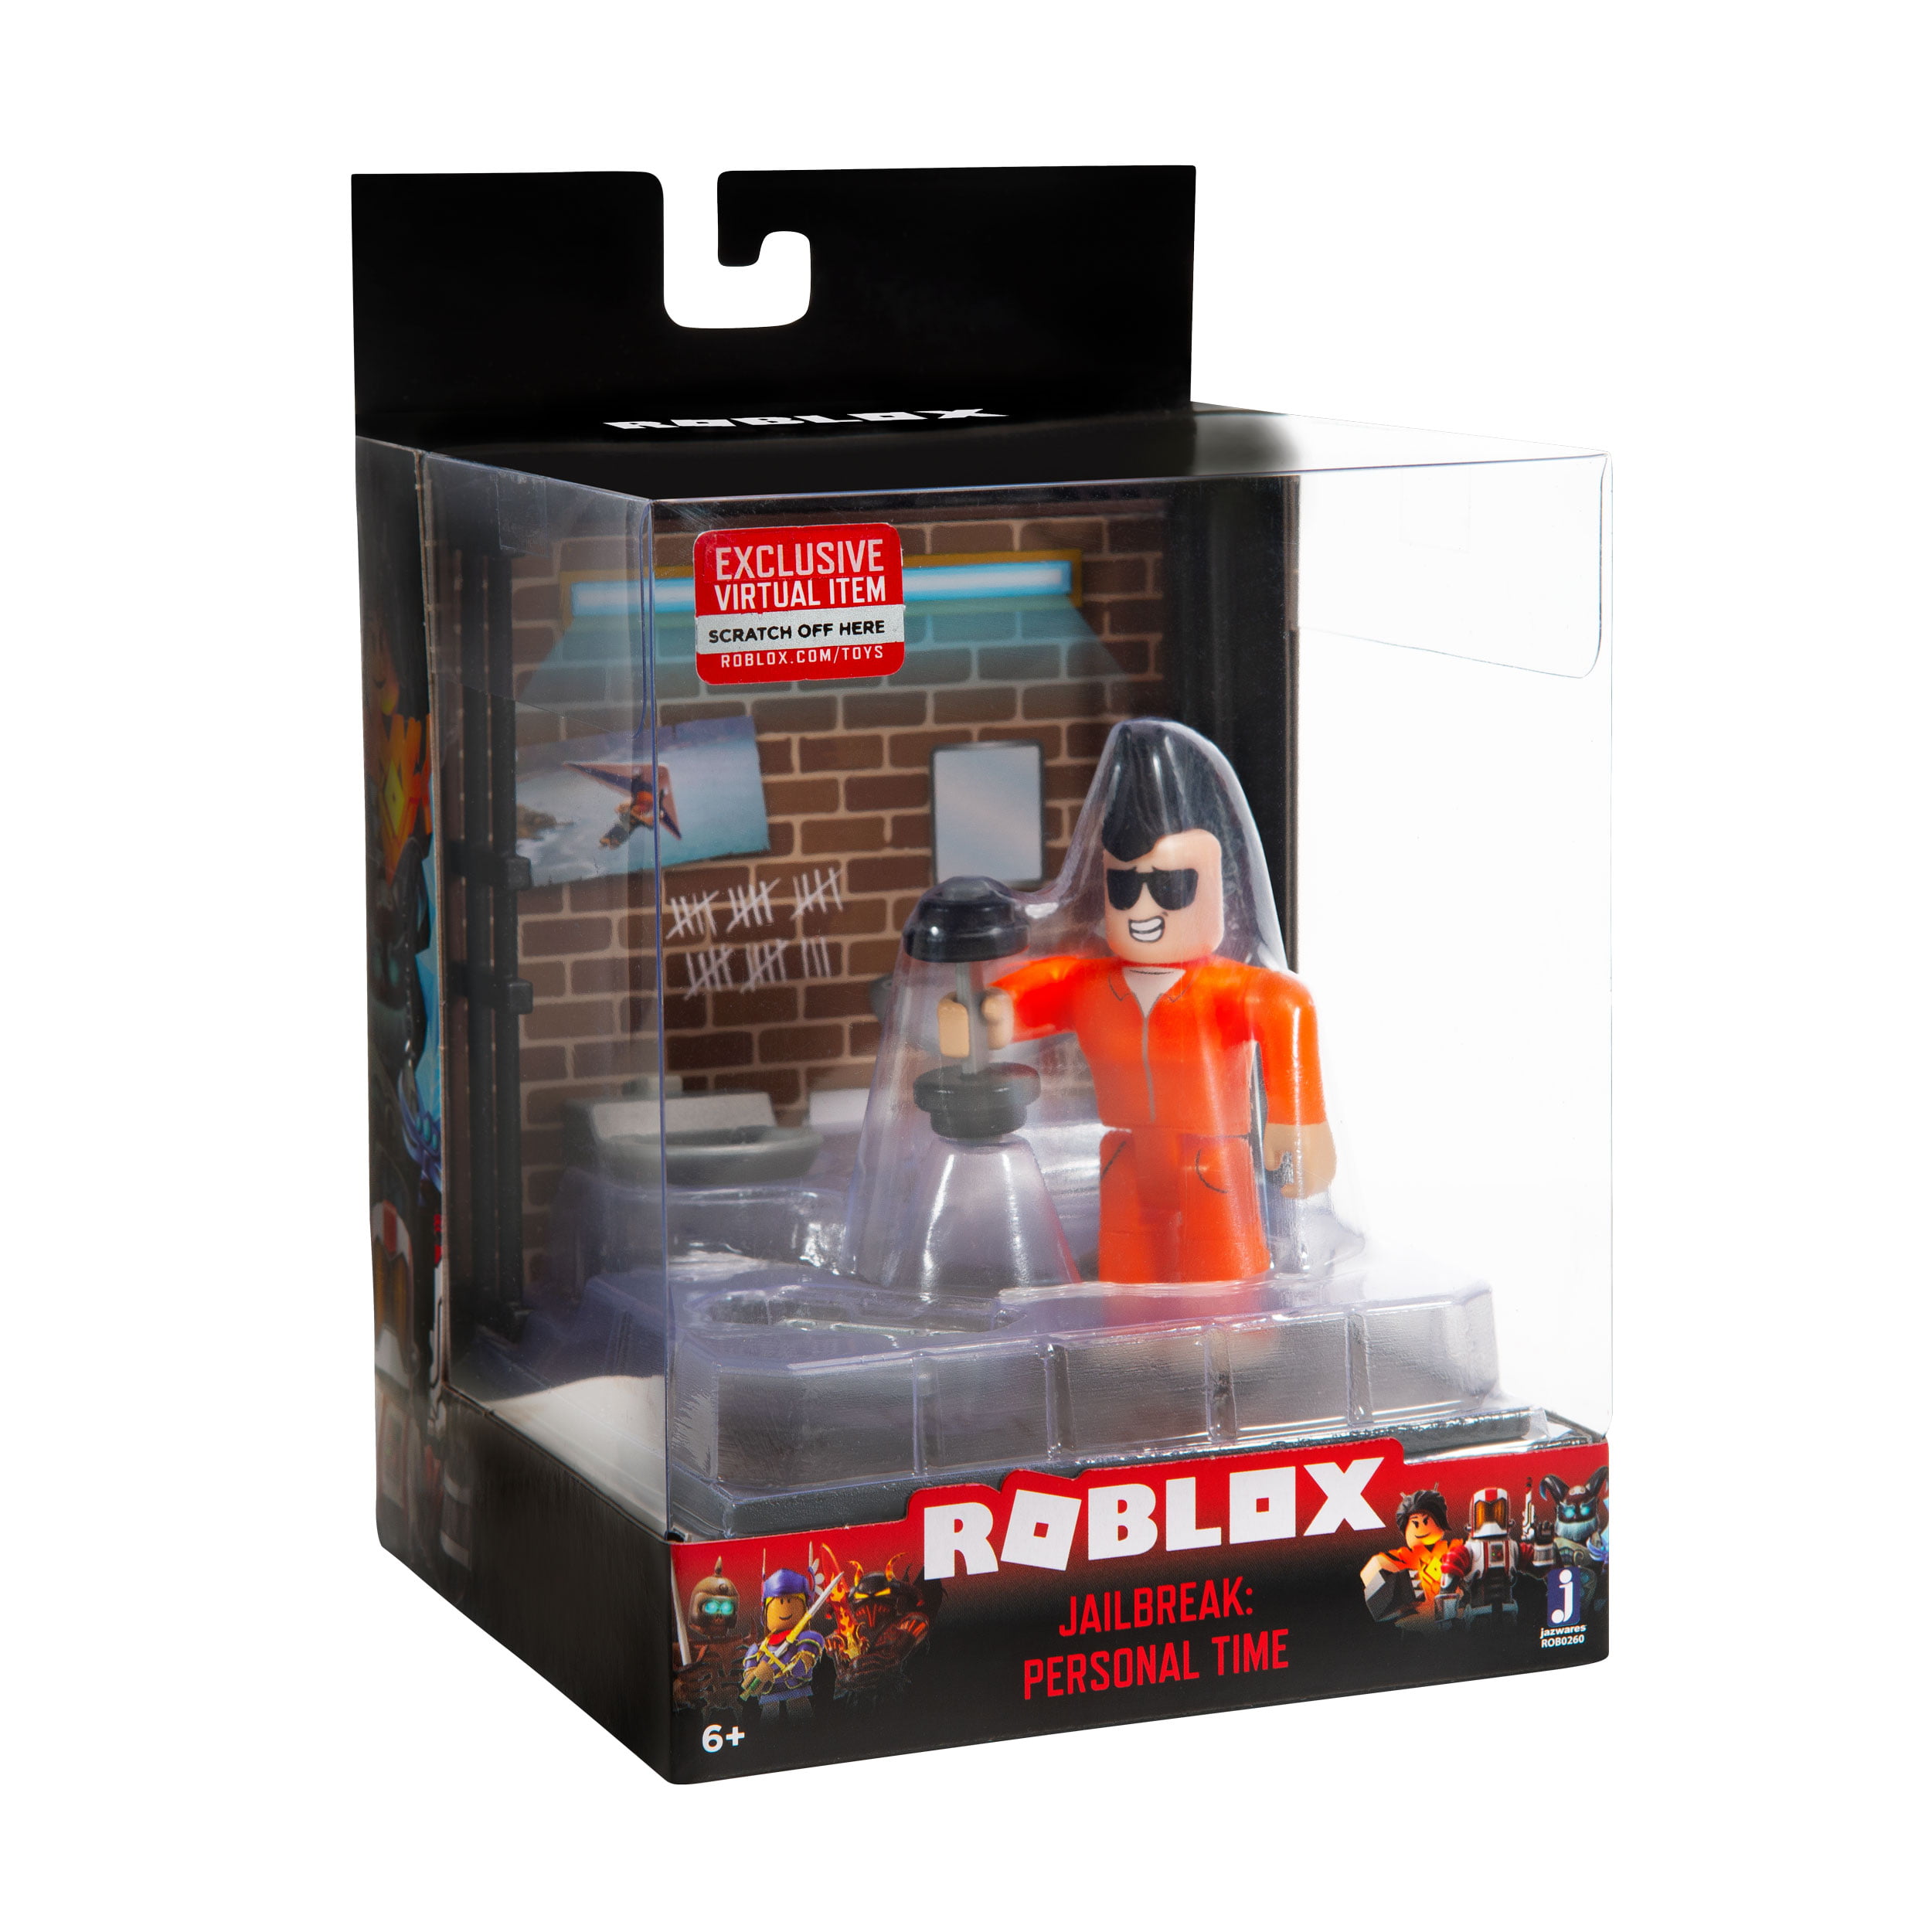 Includes Exclusive Jailbreak Personal Time Details about   Roblox Desktop Series Collection 